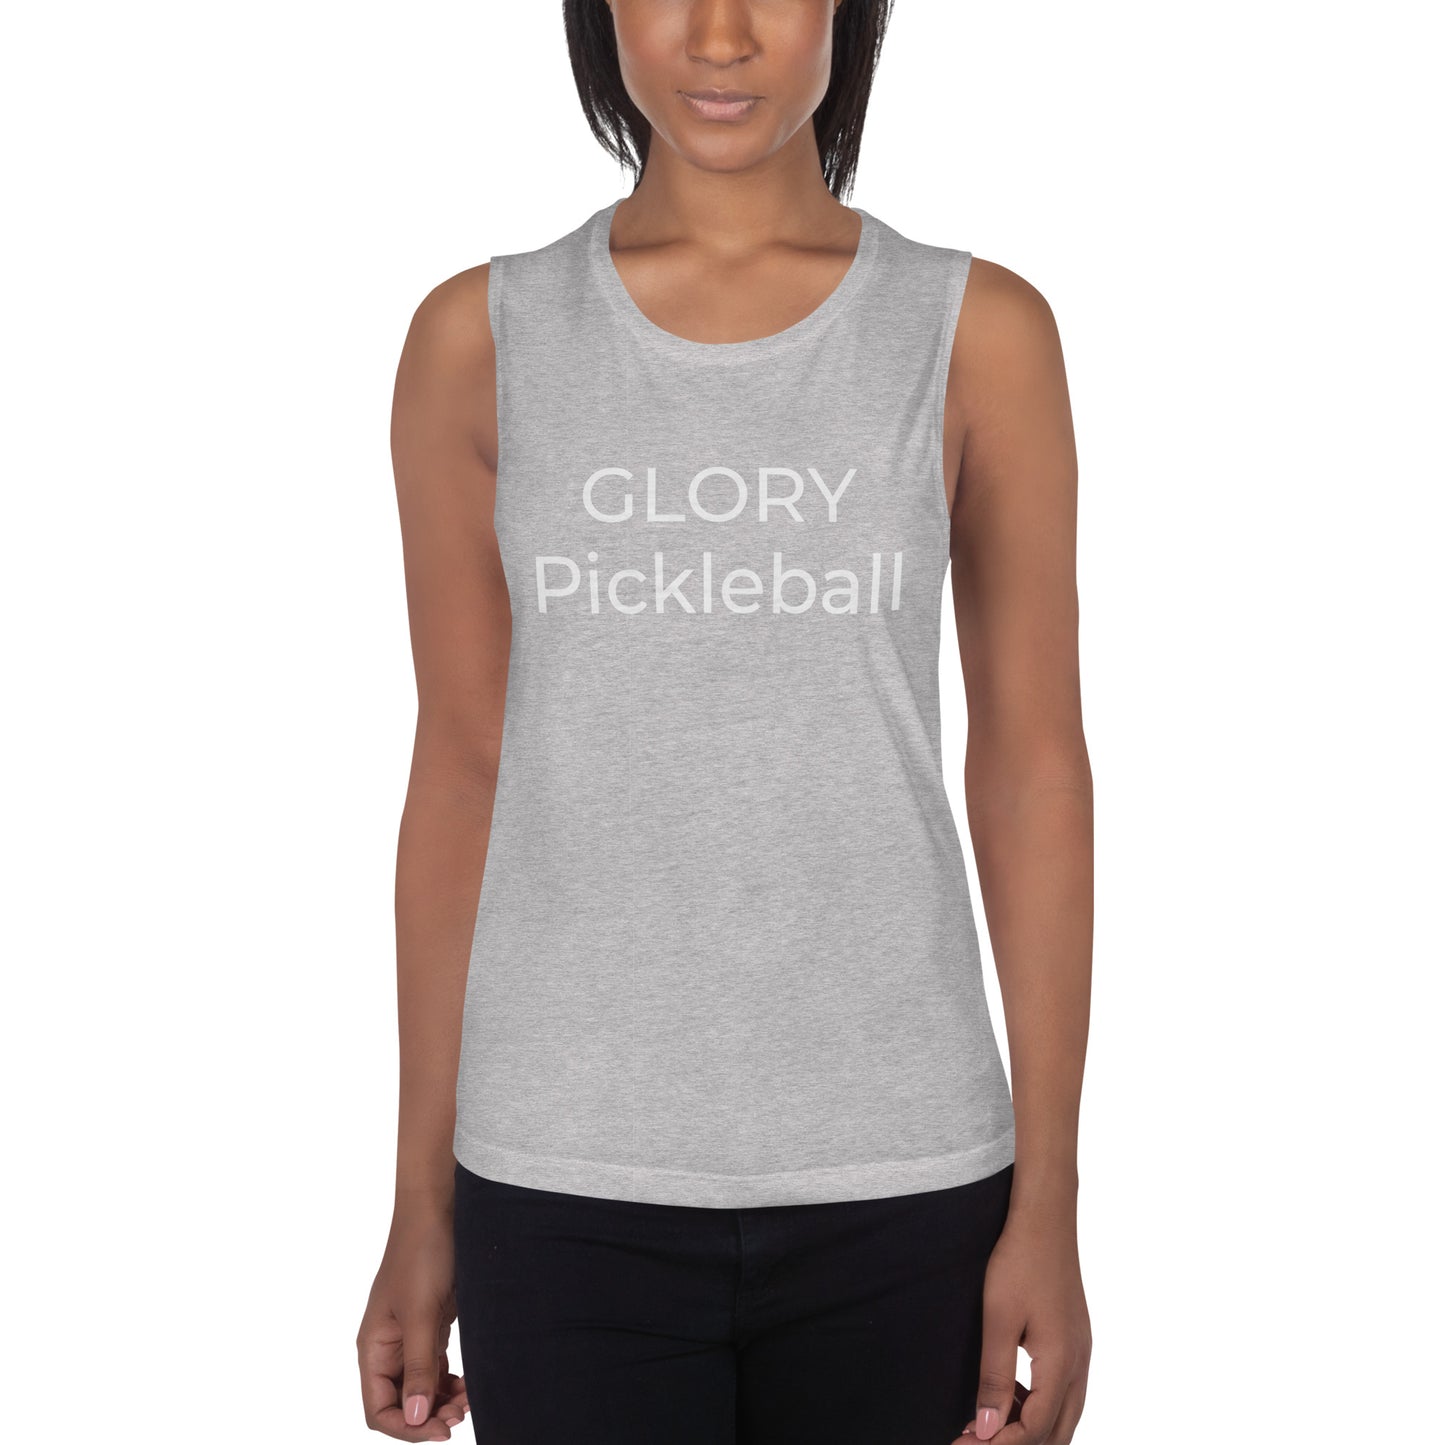 Ladies’ Muscle Tank - Made to order